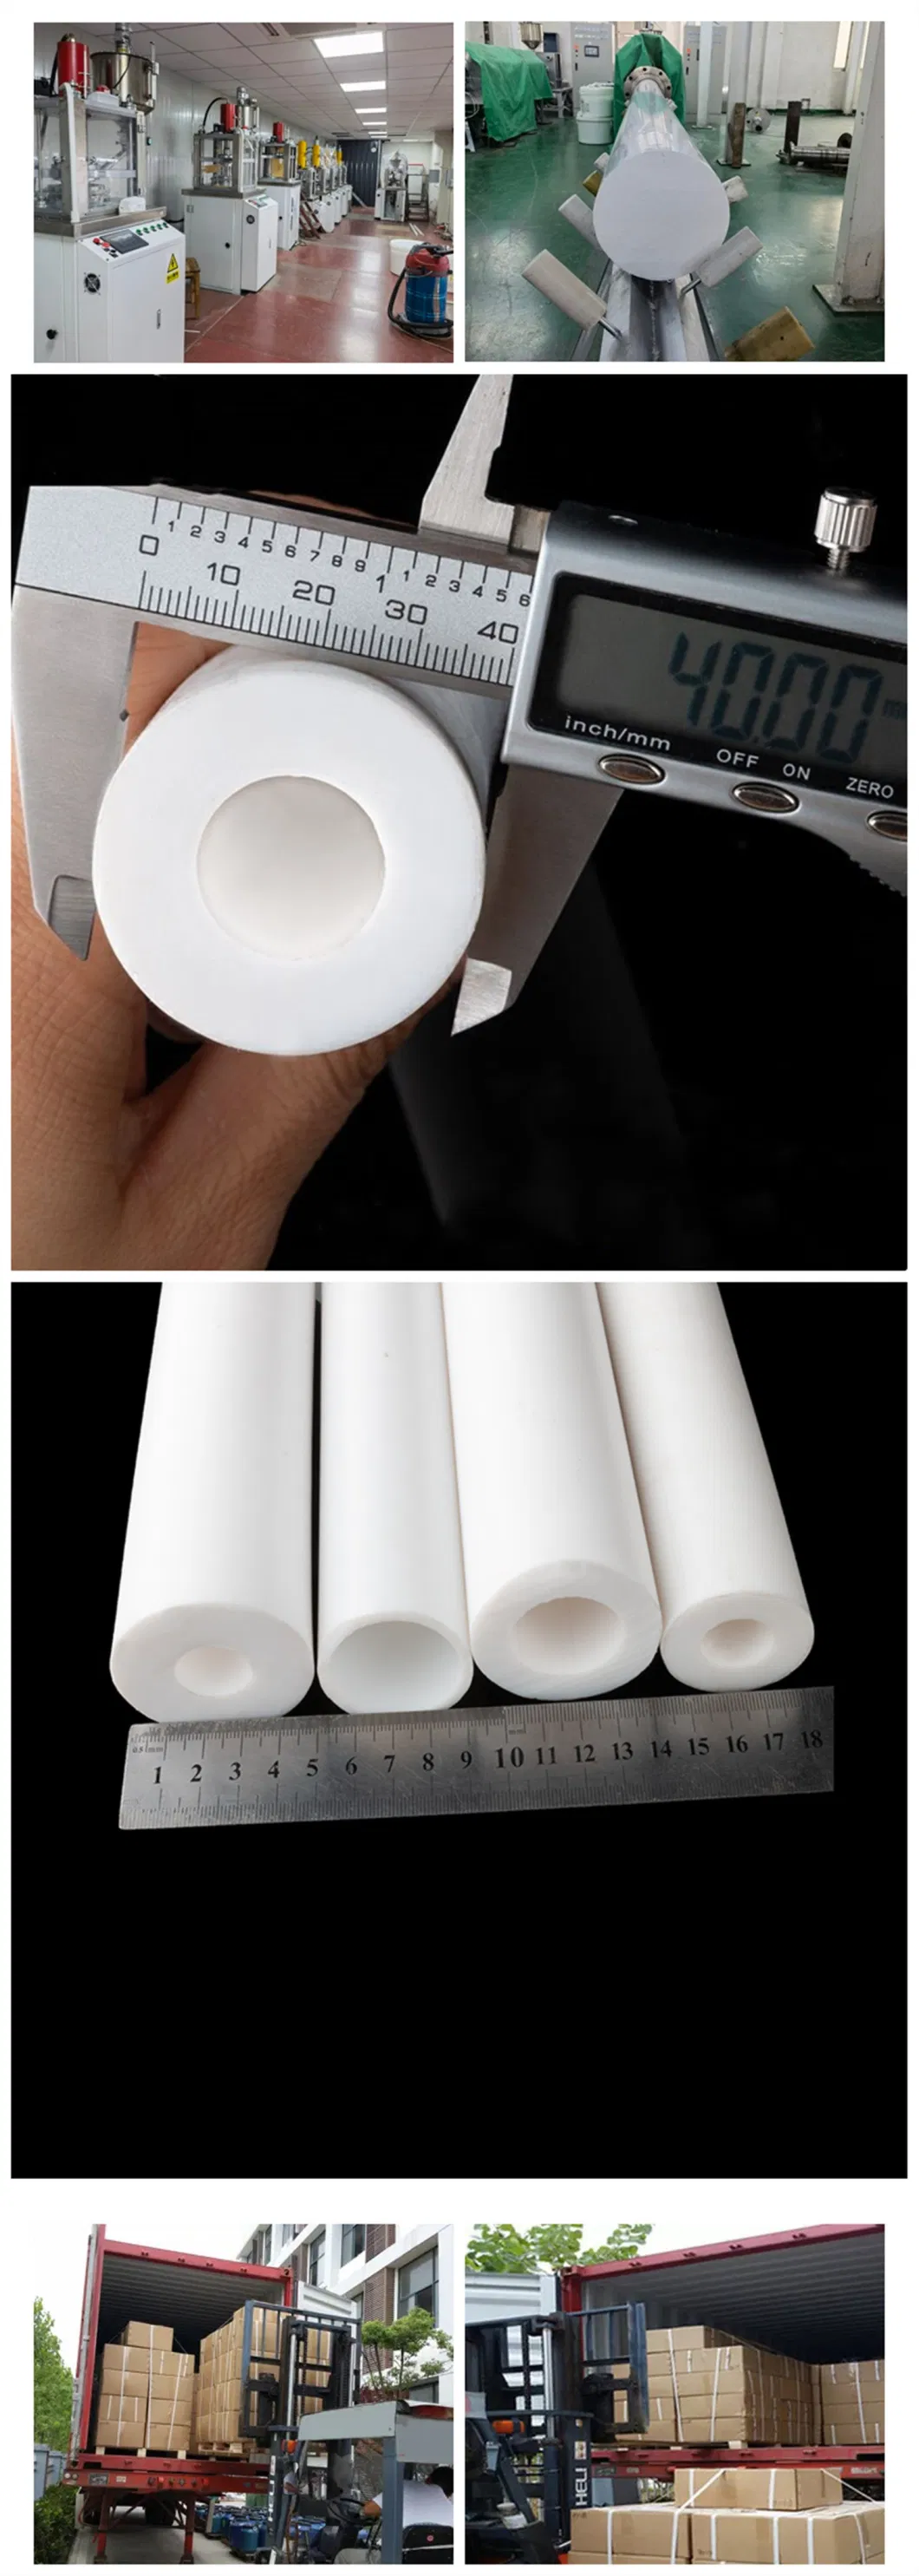 China Supplier 250*200 PTFE Material Tube Filled Carbon Graphite Material